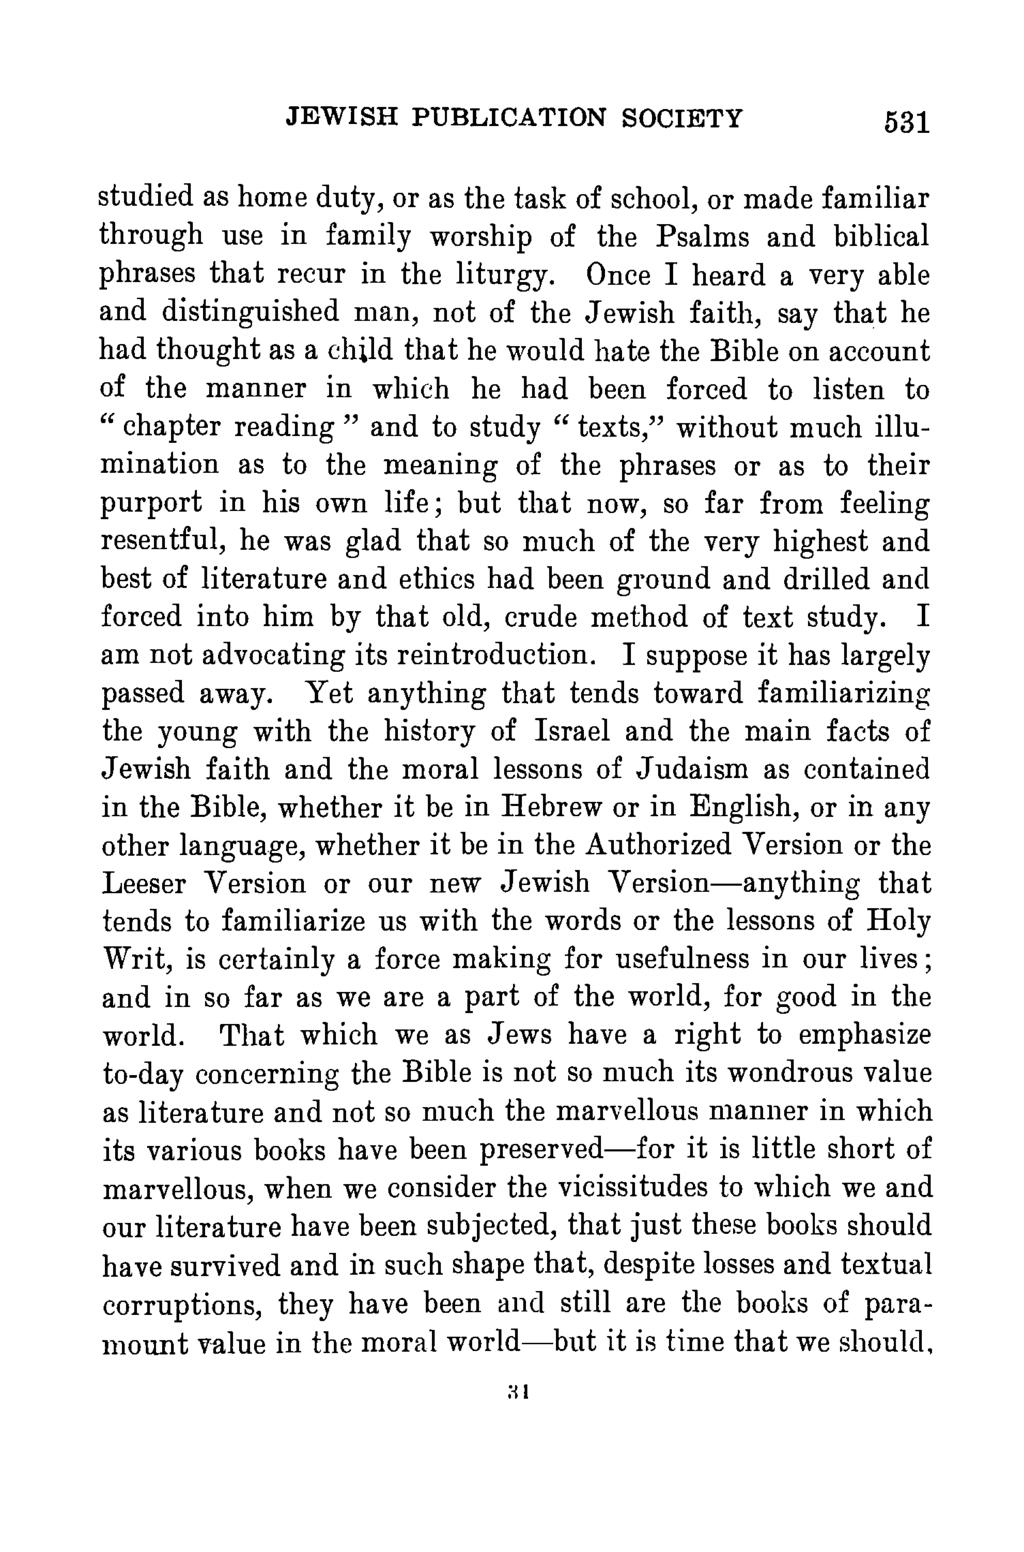 JEWISH PUBLICATION SOCIETY 531 studied as home duty, or as the task of school, or made familiar through use in family worship of the Psalms and biblical phrases that recur in the liturgy.